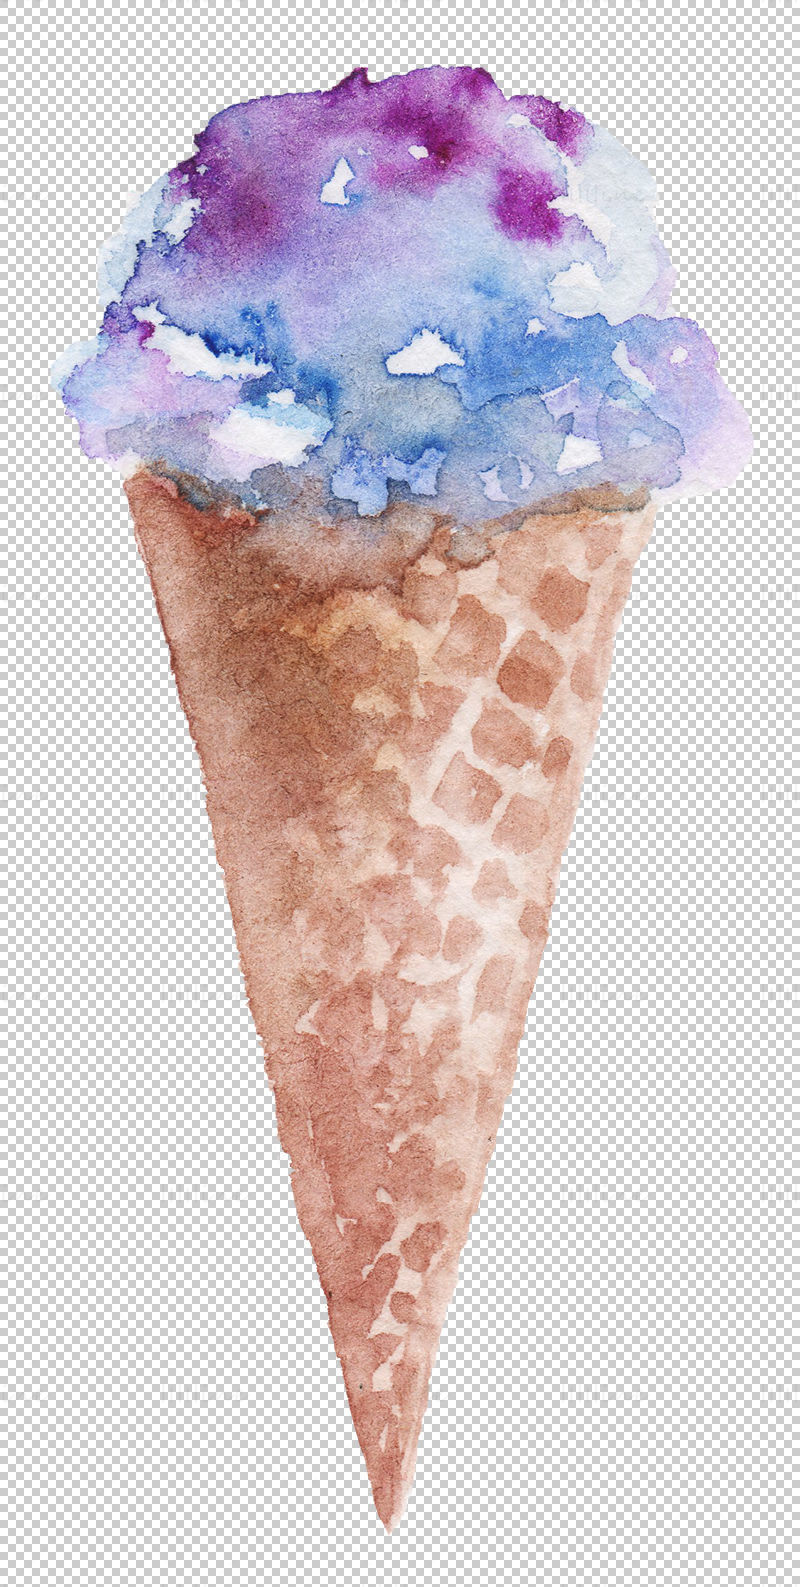 Watercolor ice cream png